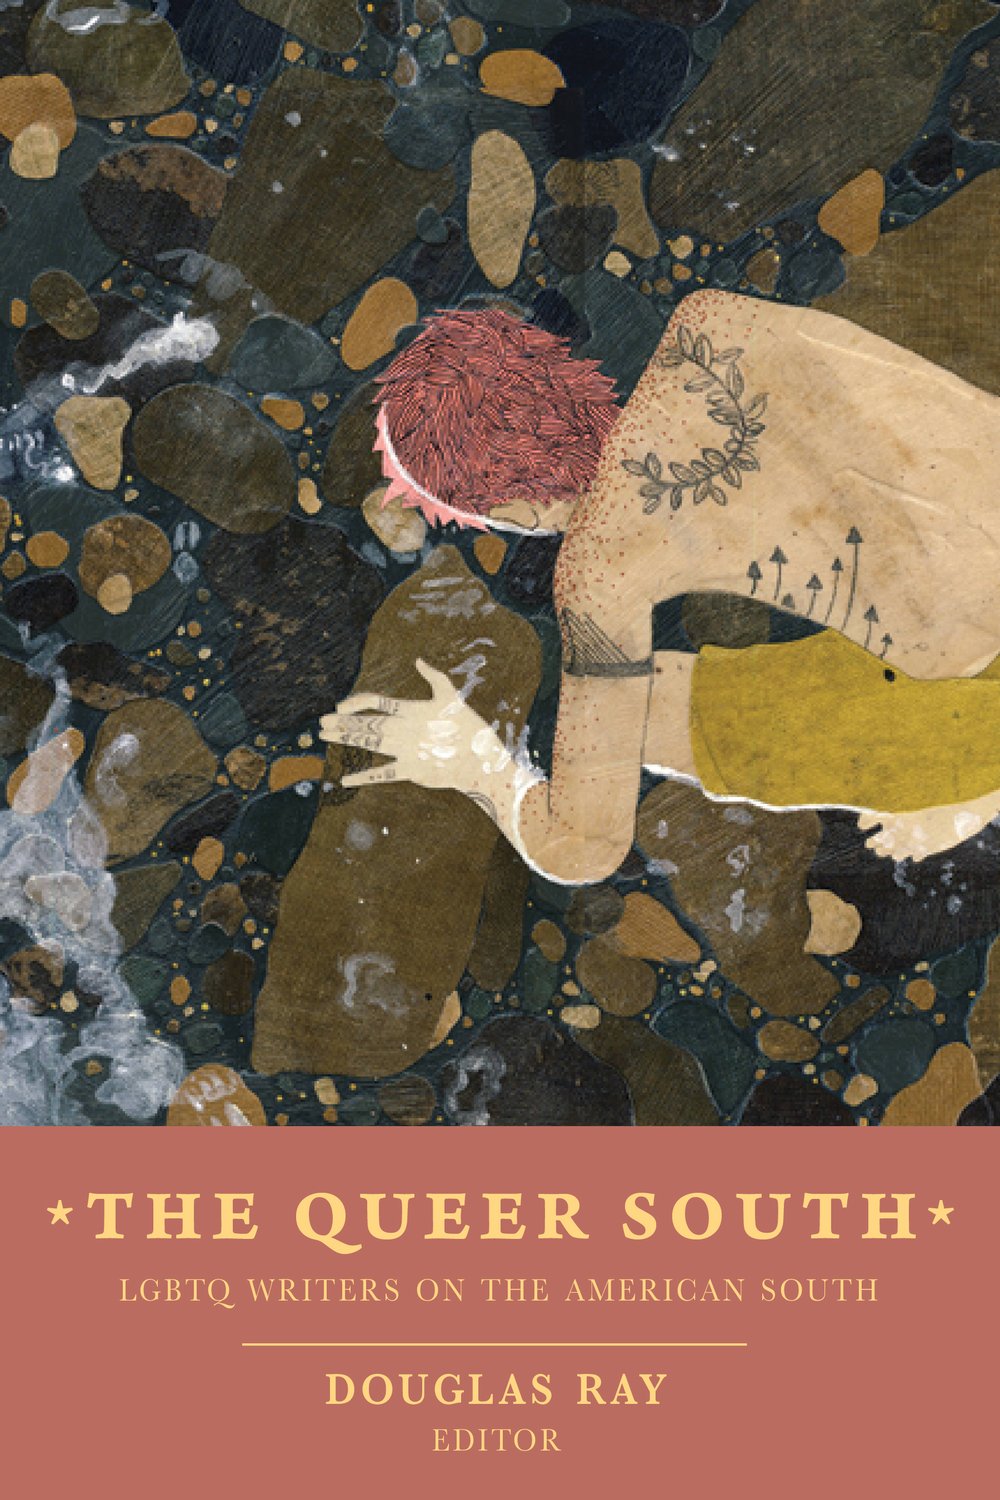 The Queer South: LGBTQ Writers on the American South (Douglas Ray, Editor)